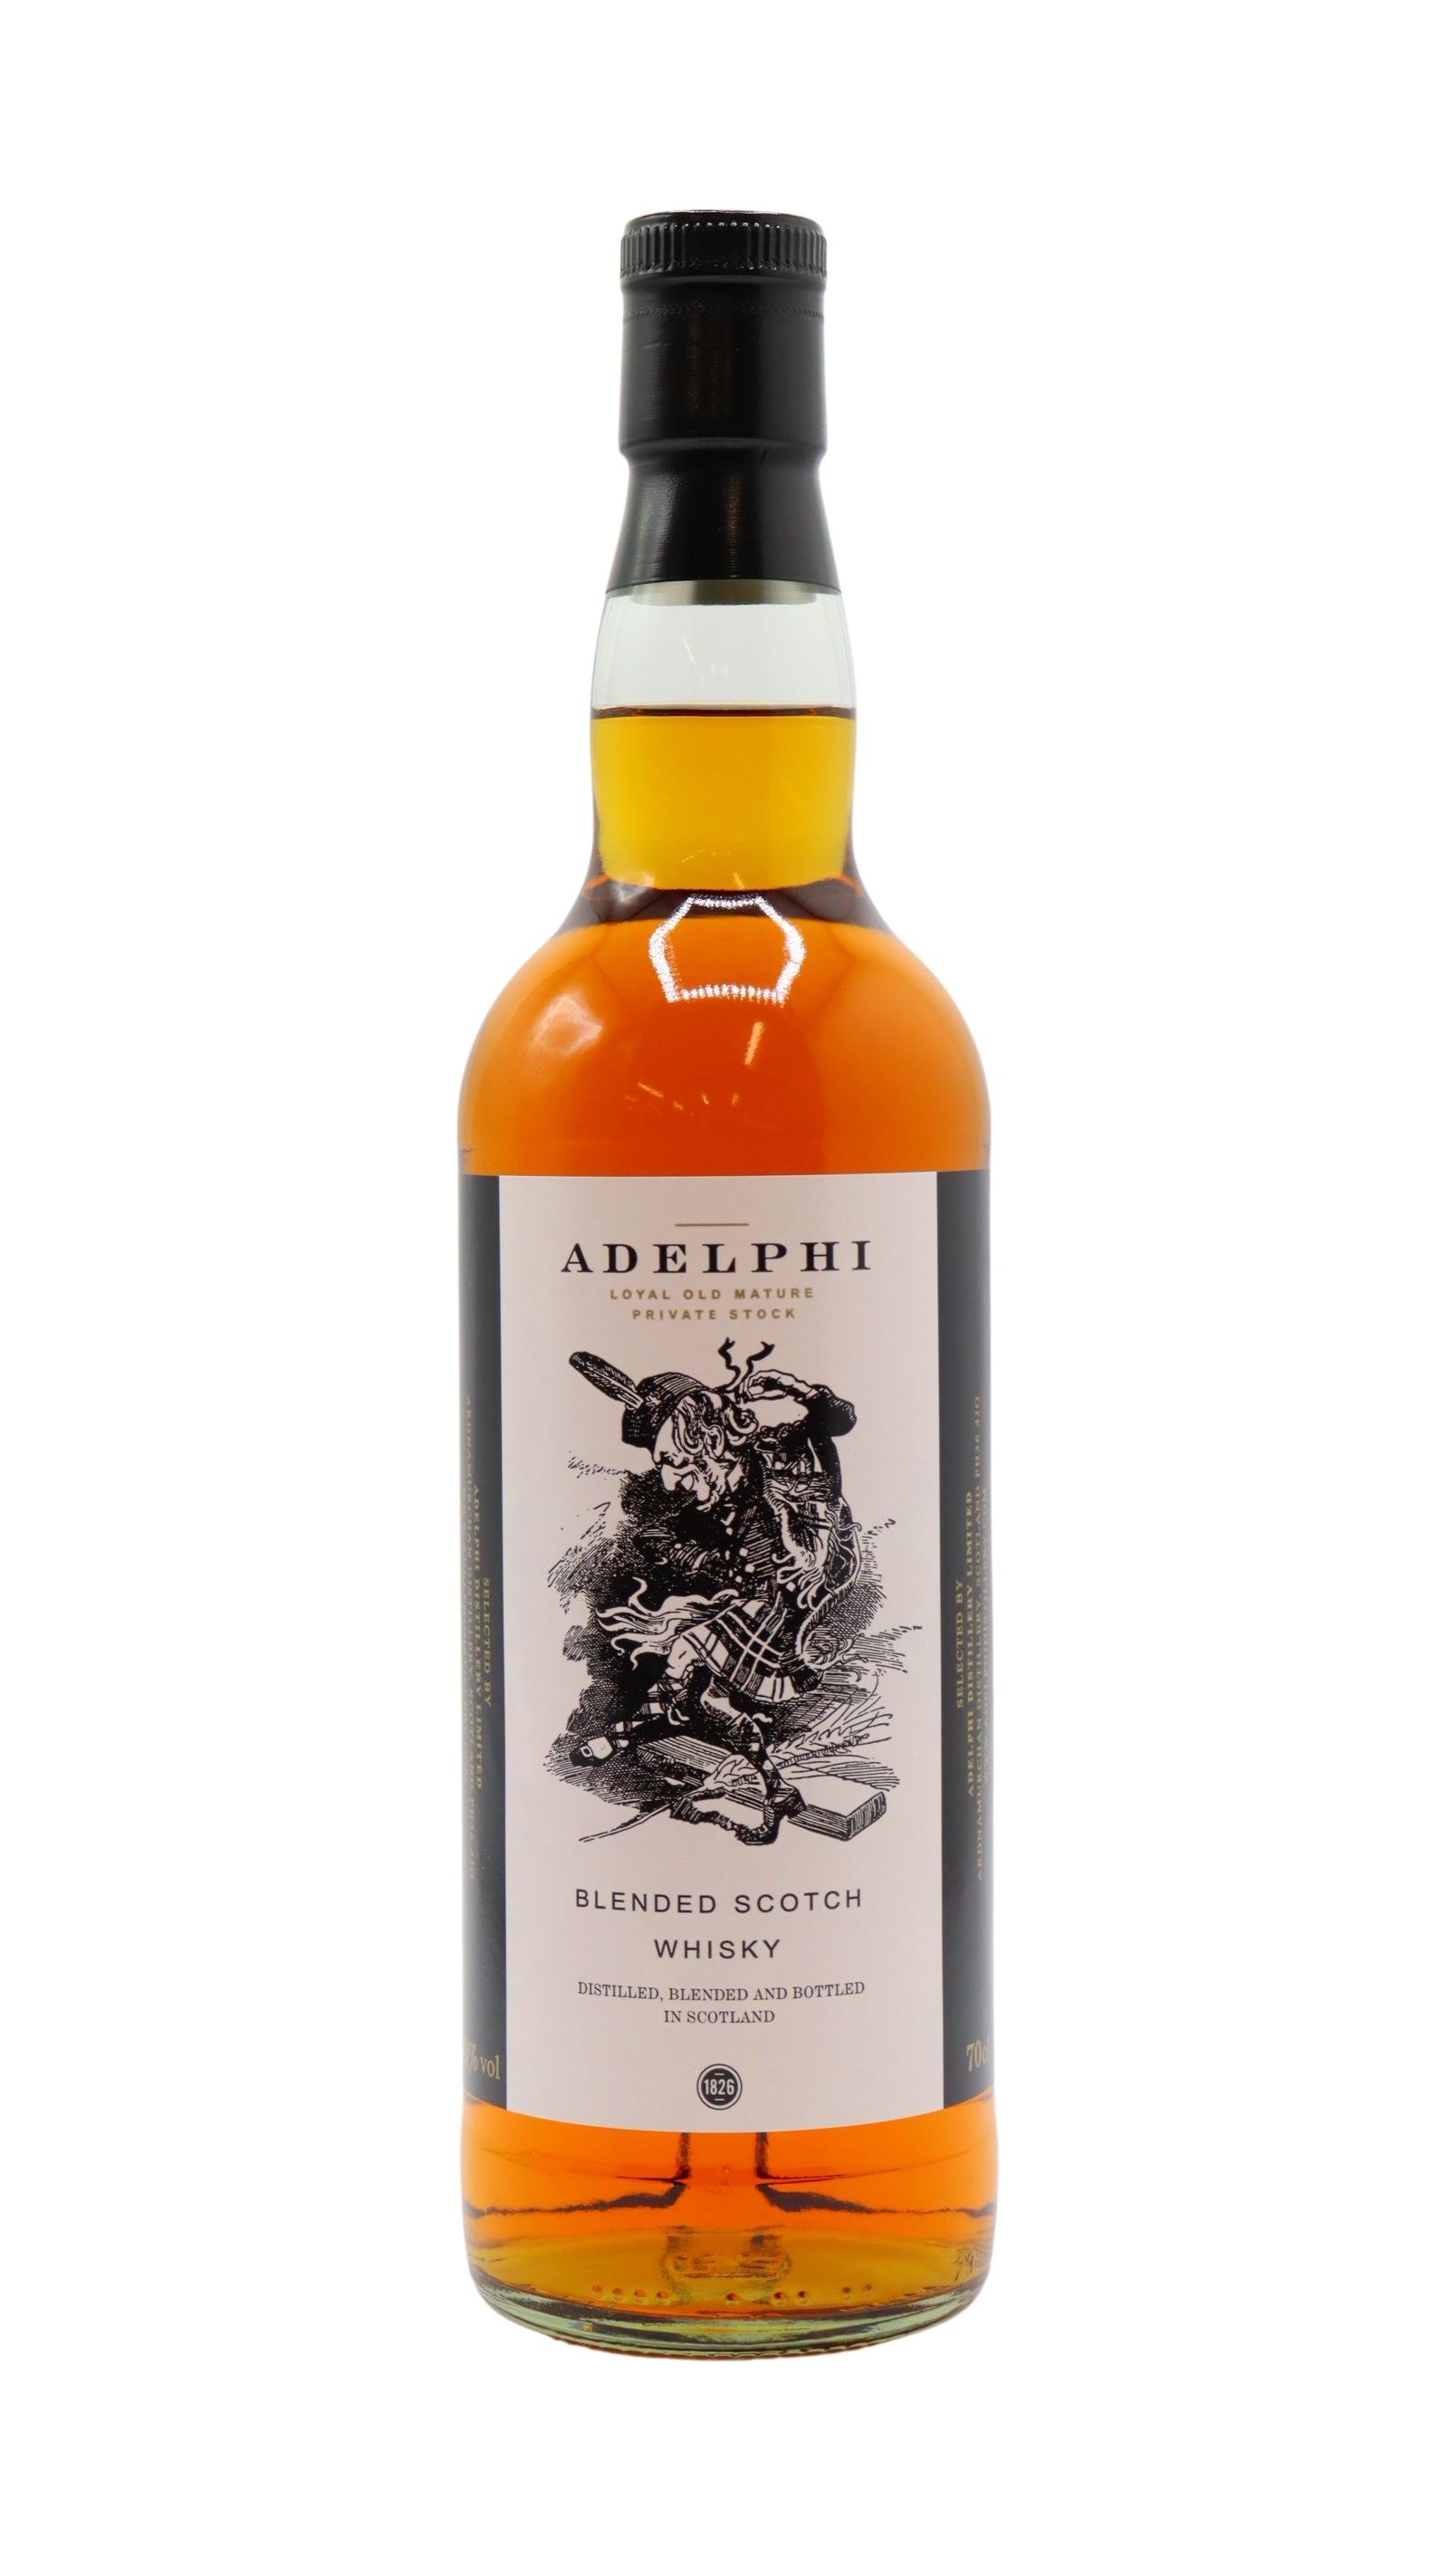 Adelphi Private Stock Blended Scotch Whisky 70CL Nationwide Liquor